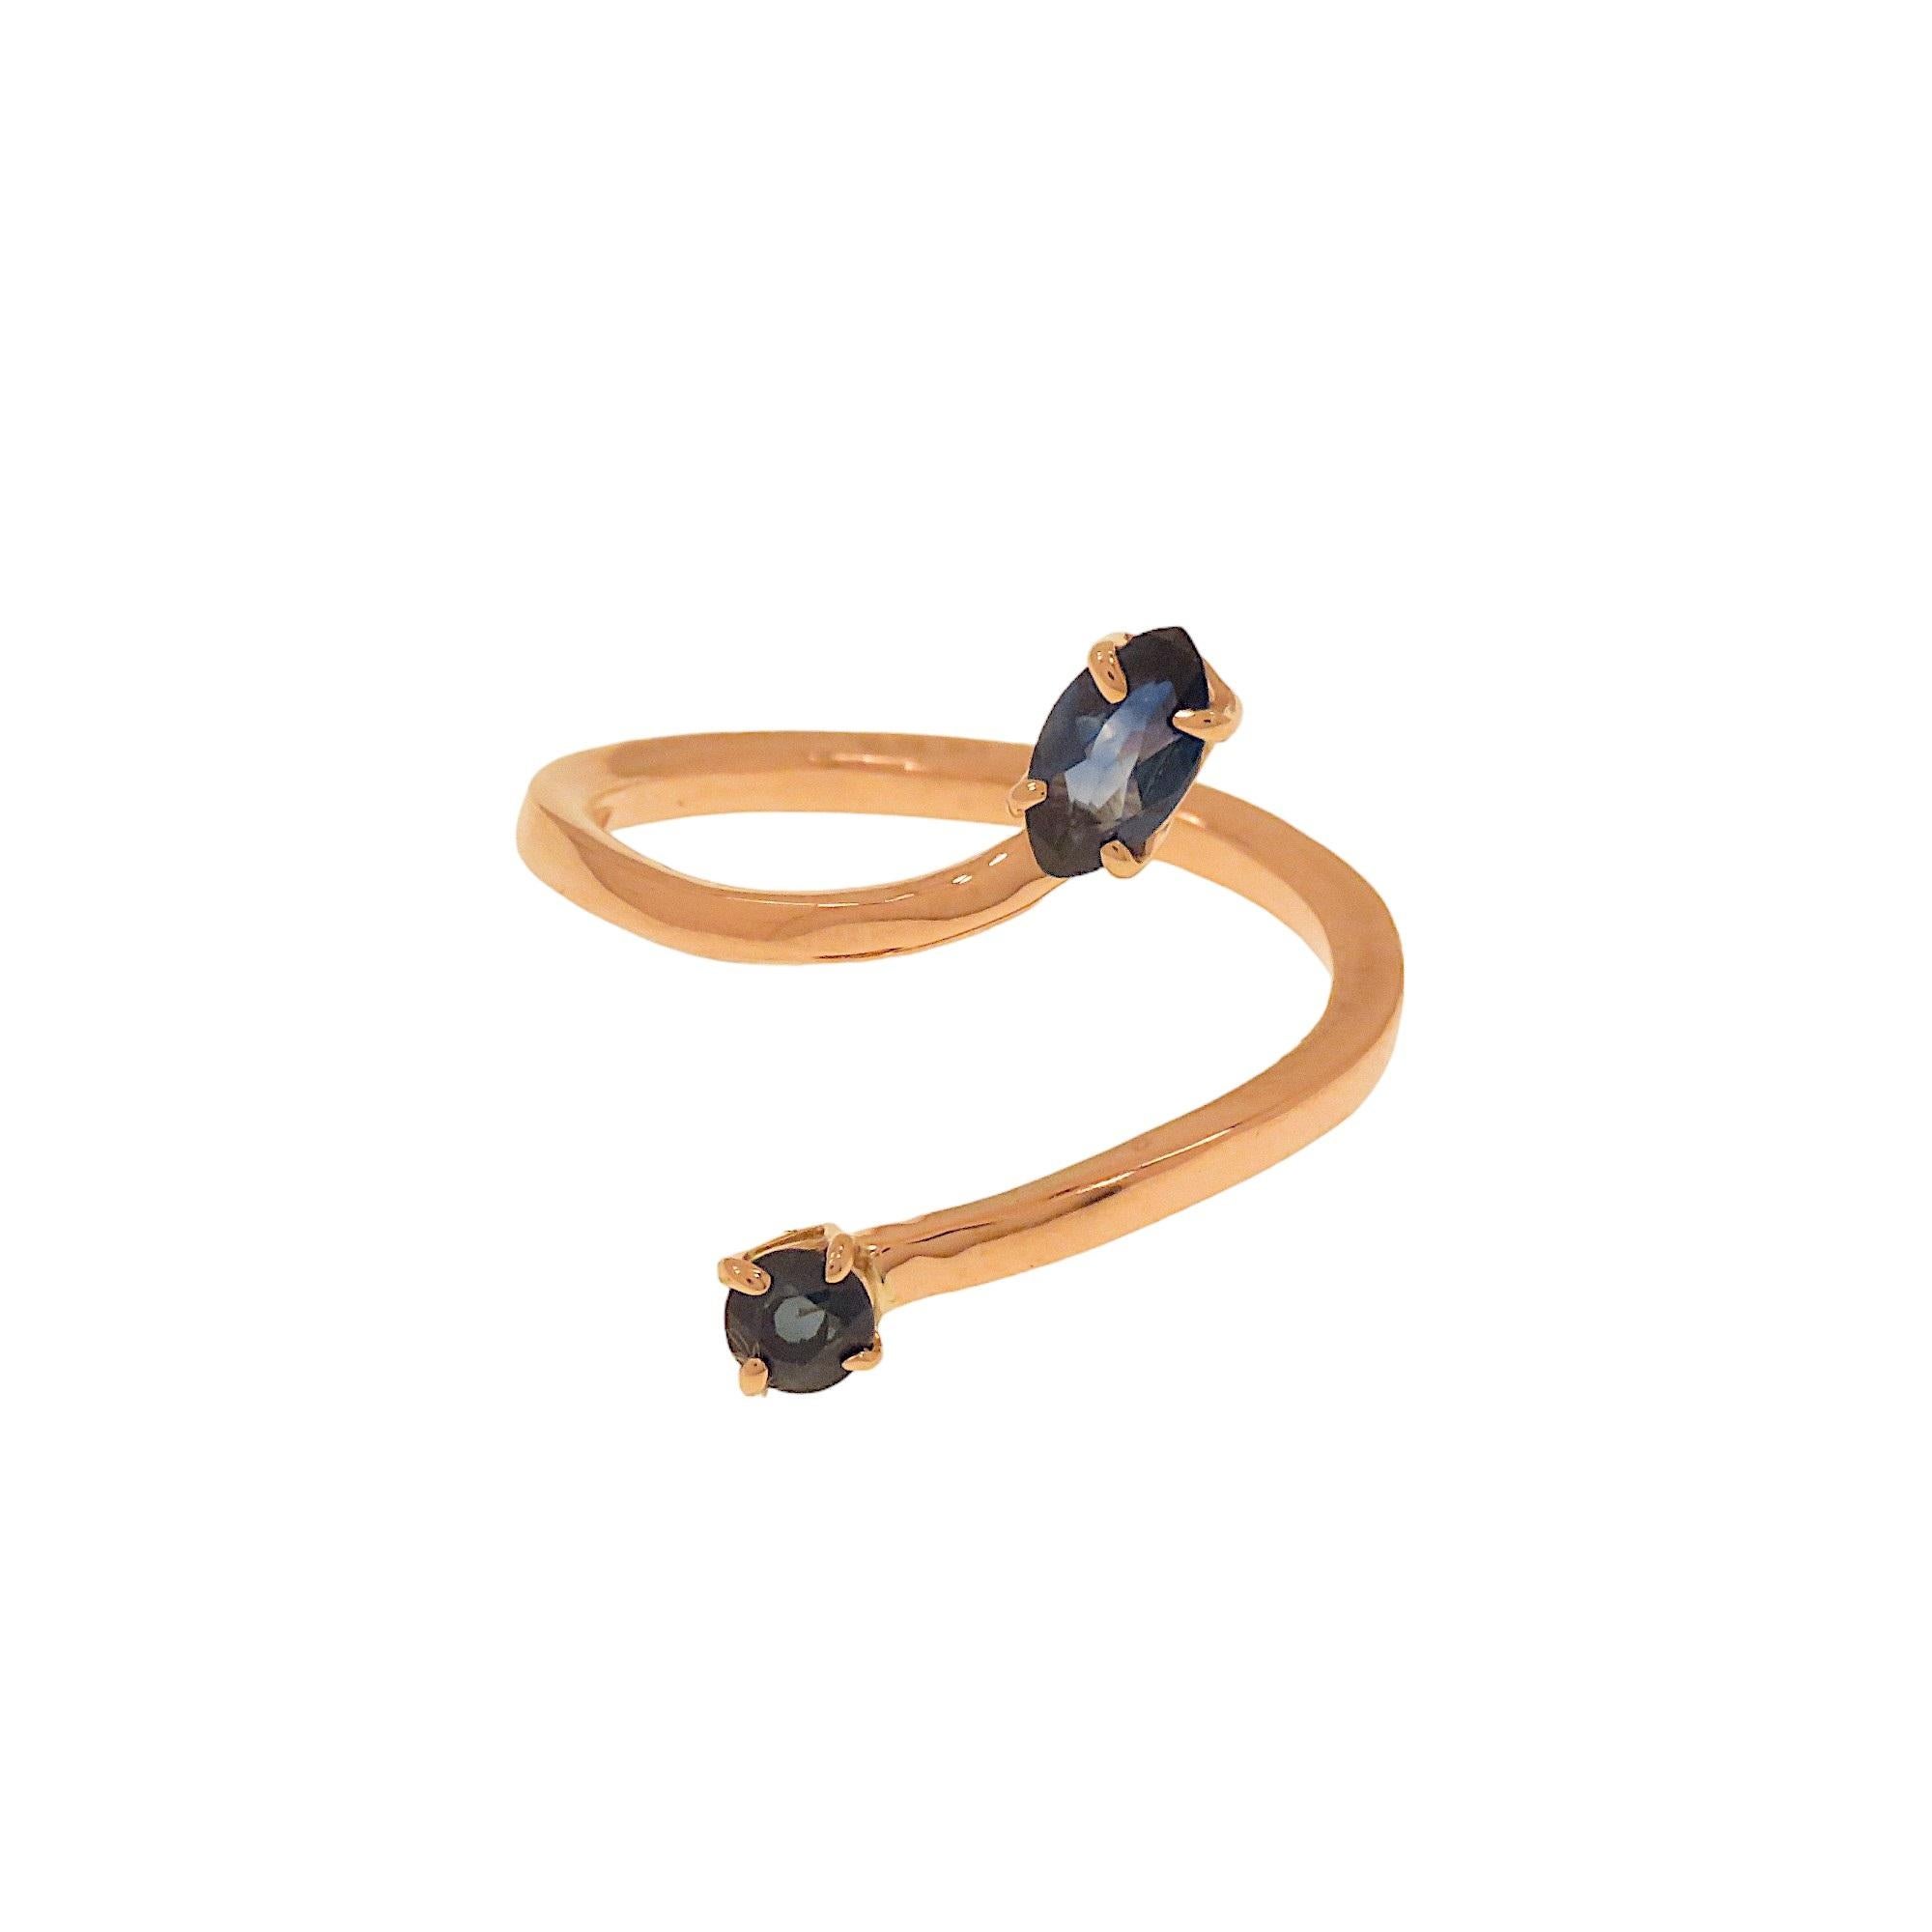 Botta jewelry ring with blue sapphires in rose gold made in Italy For Sale 1